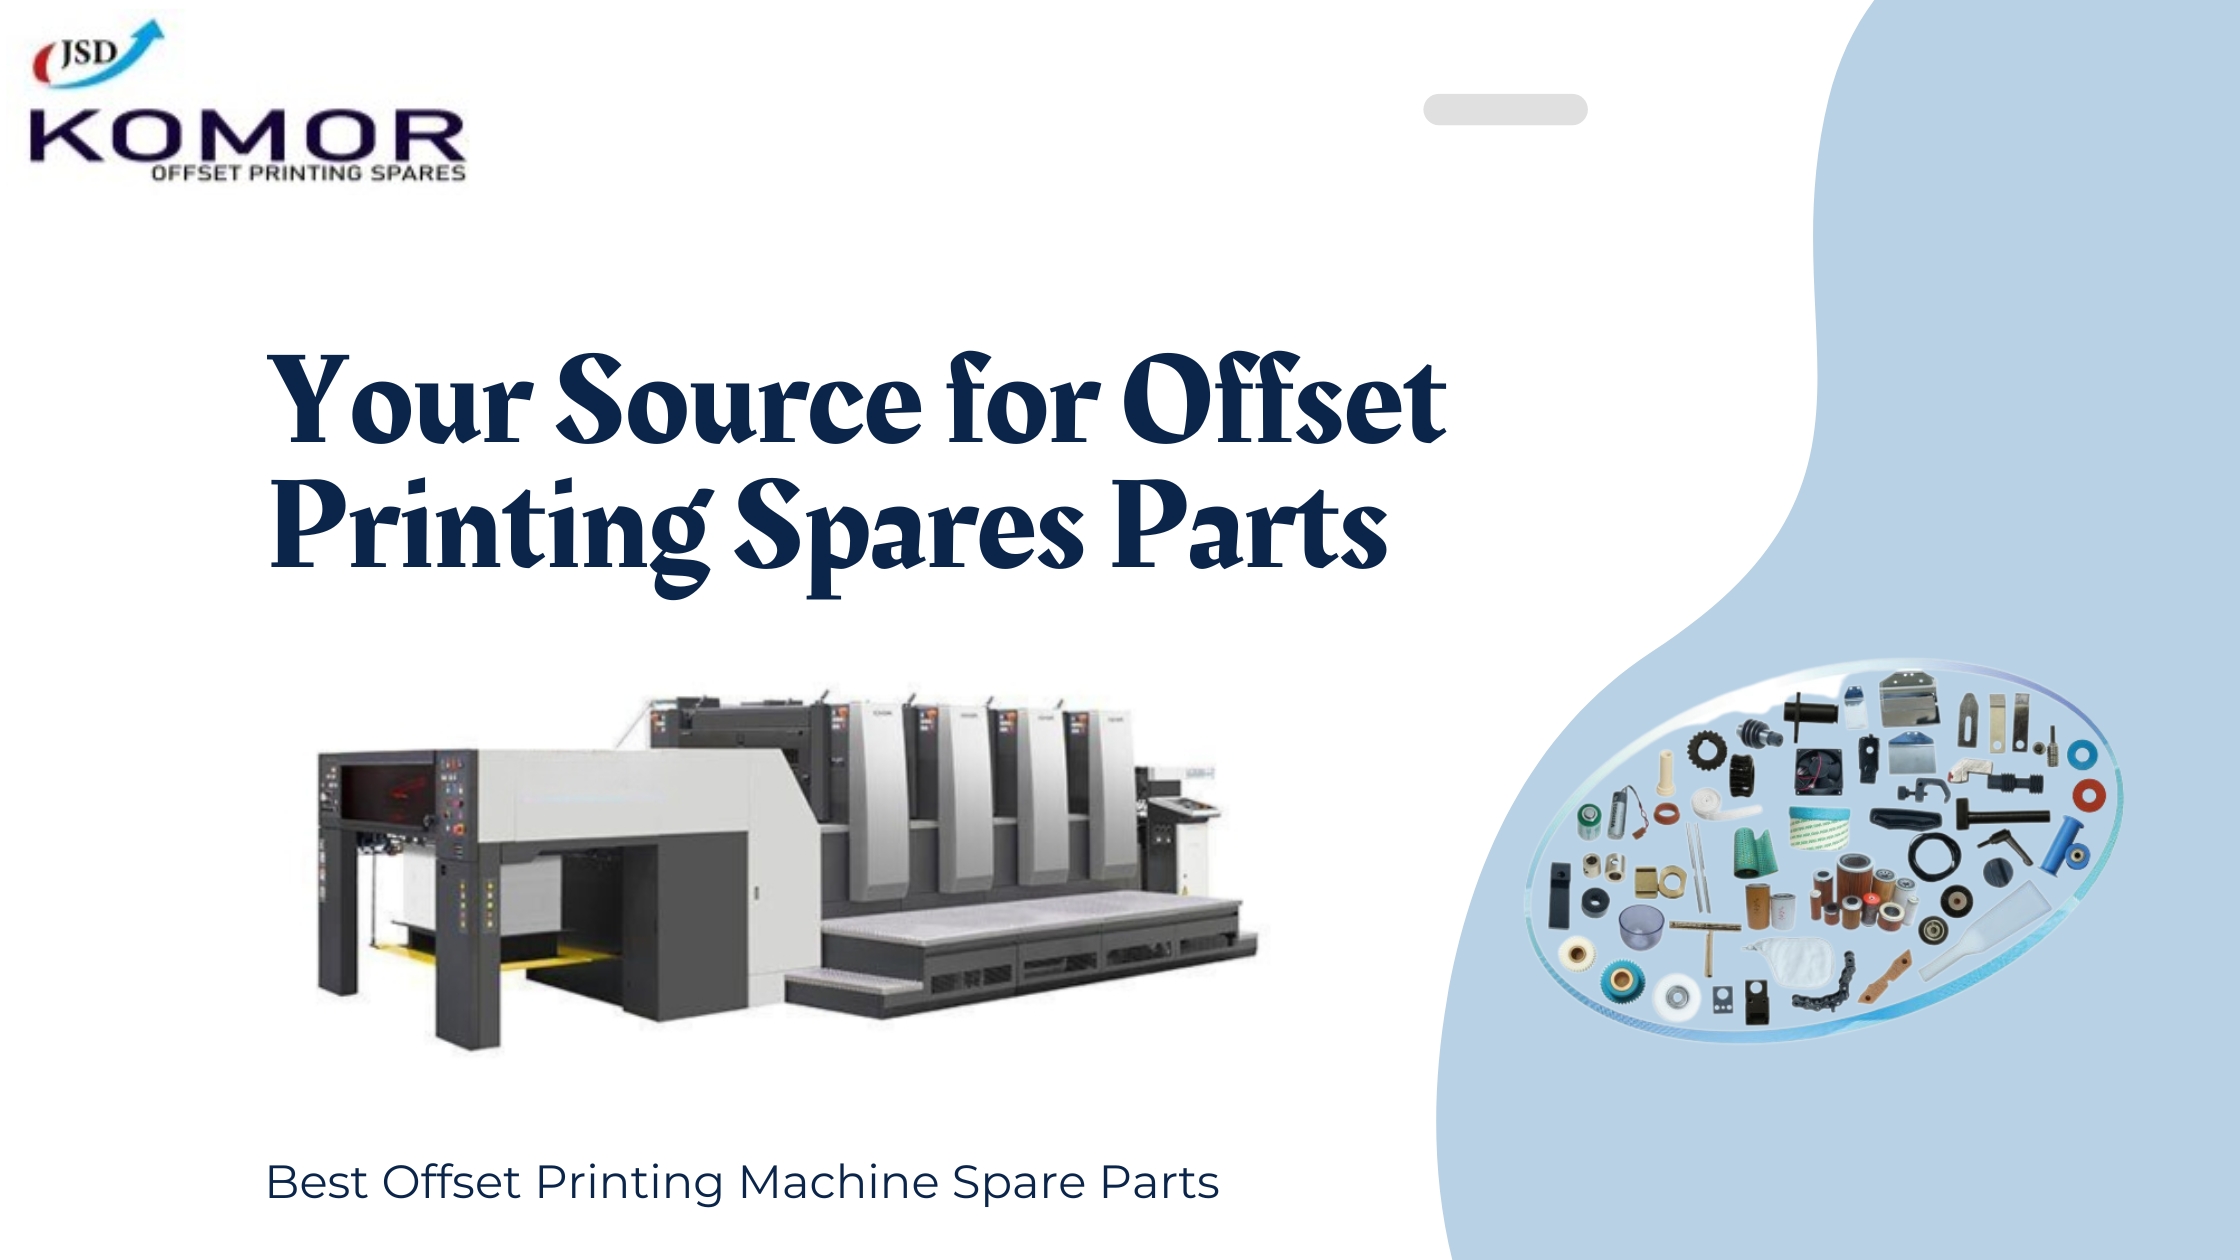 Your Source for Top-Tier Offset Printing Spares Parts